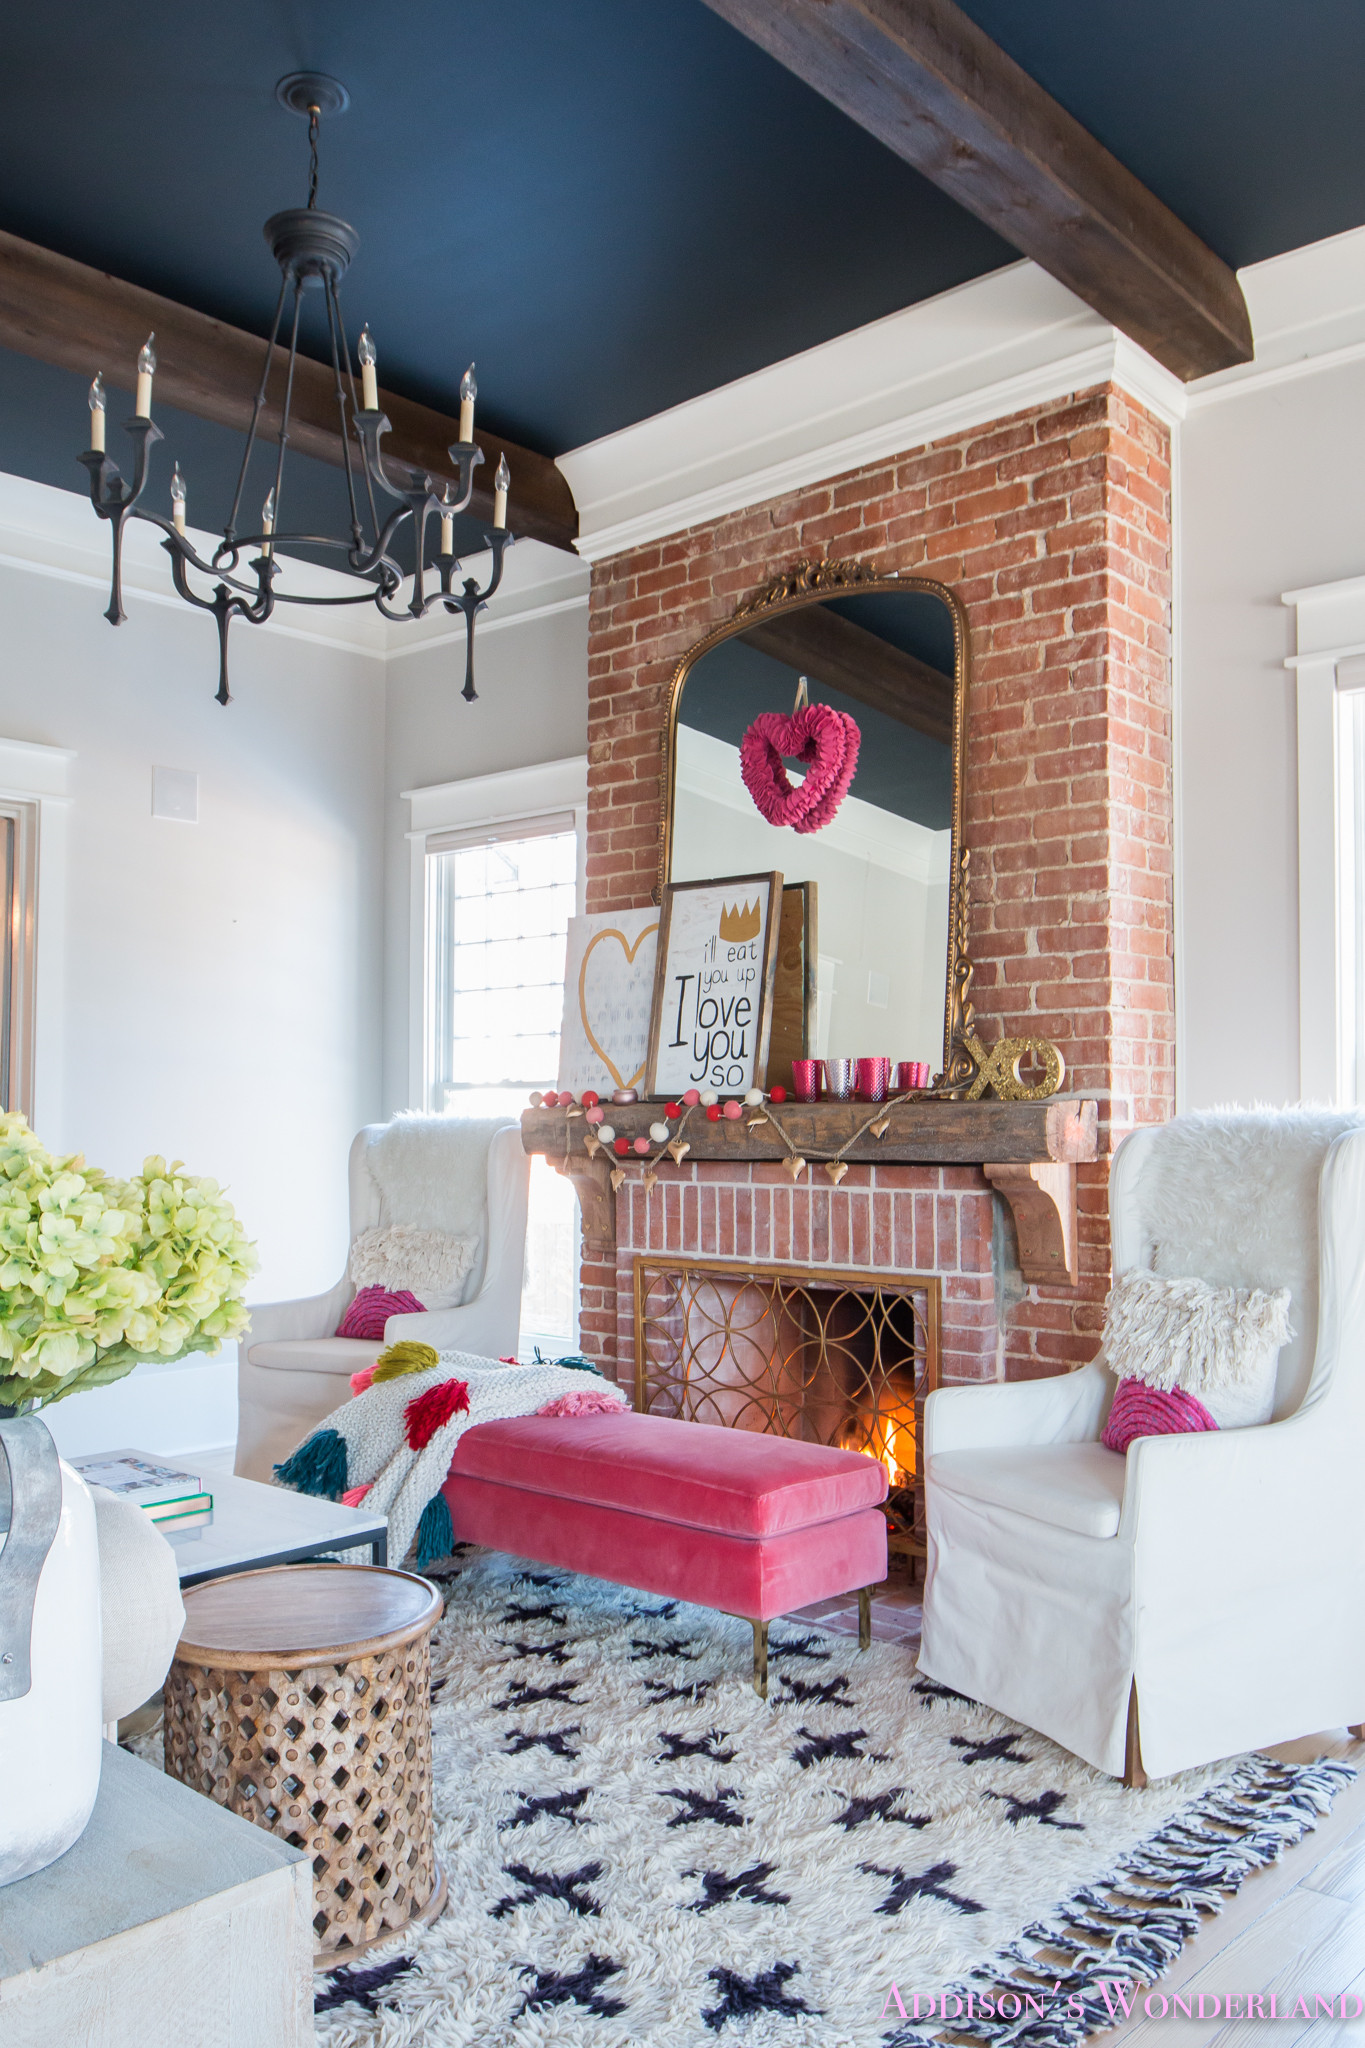 Living Room Decorating Themes
 Our Colorful Whimsical & Elegant Valentine s Day Living